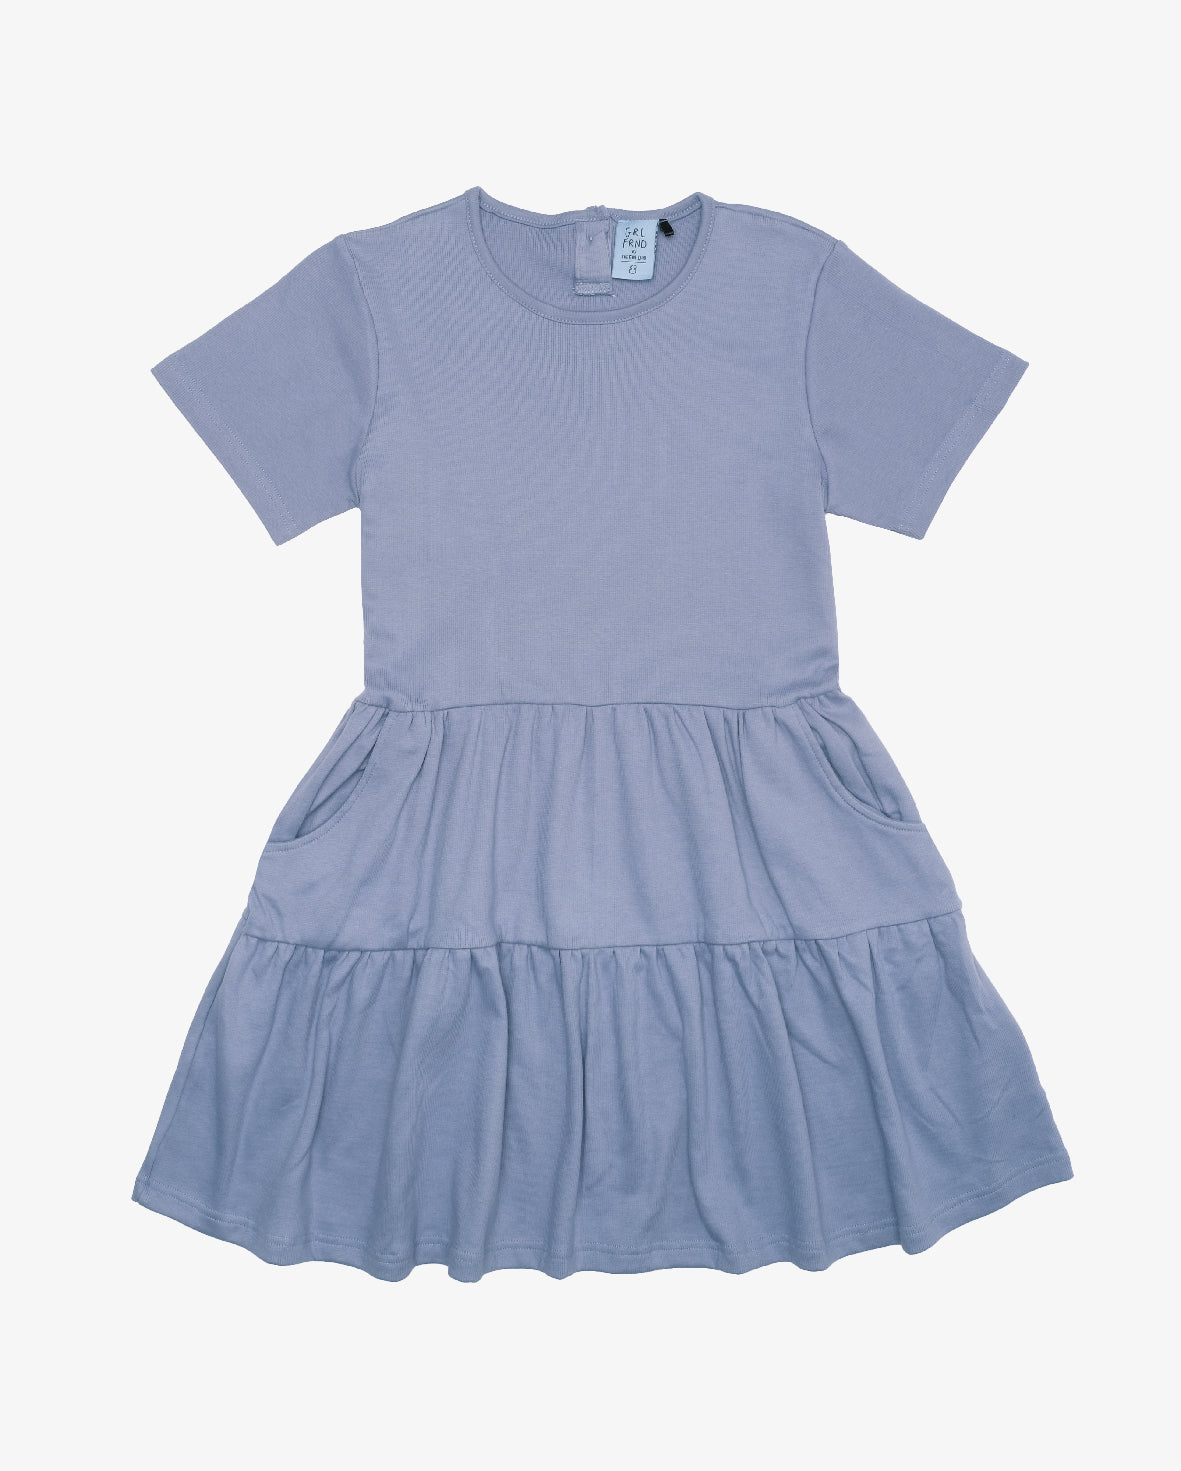 COTTON RIB RELAXED PLAY DRESS - BLUE